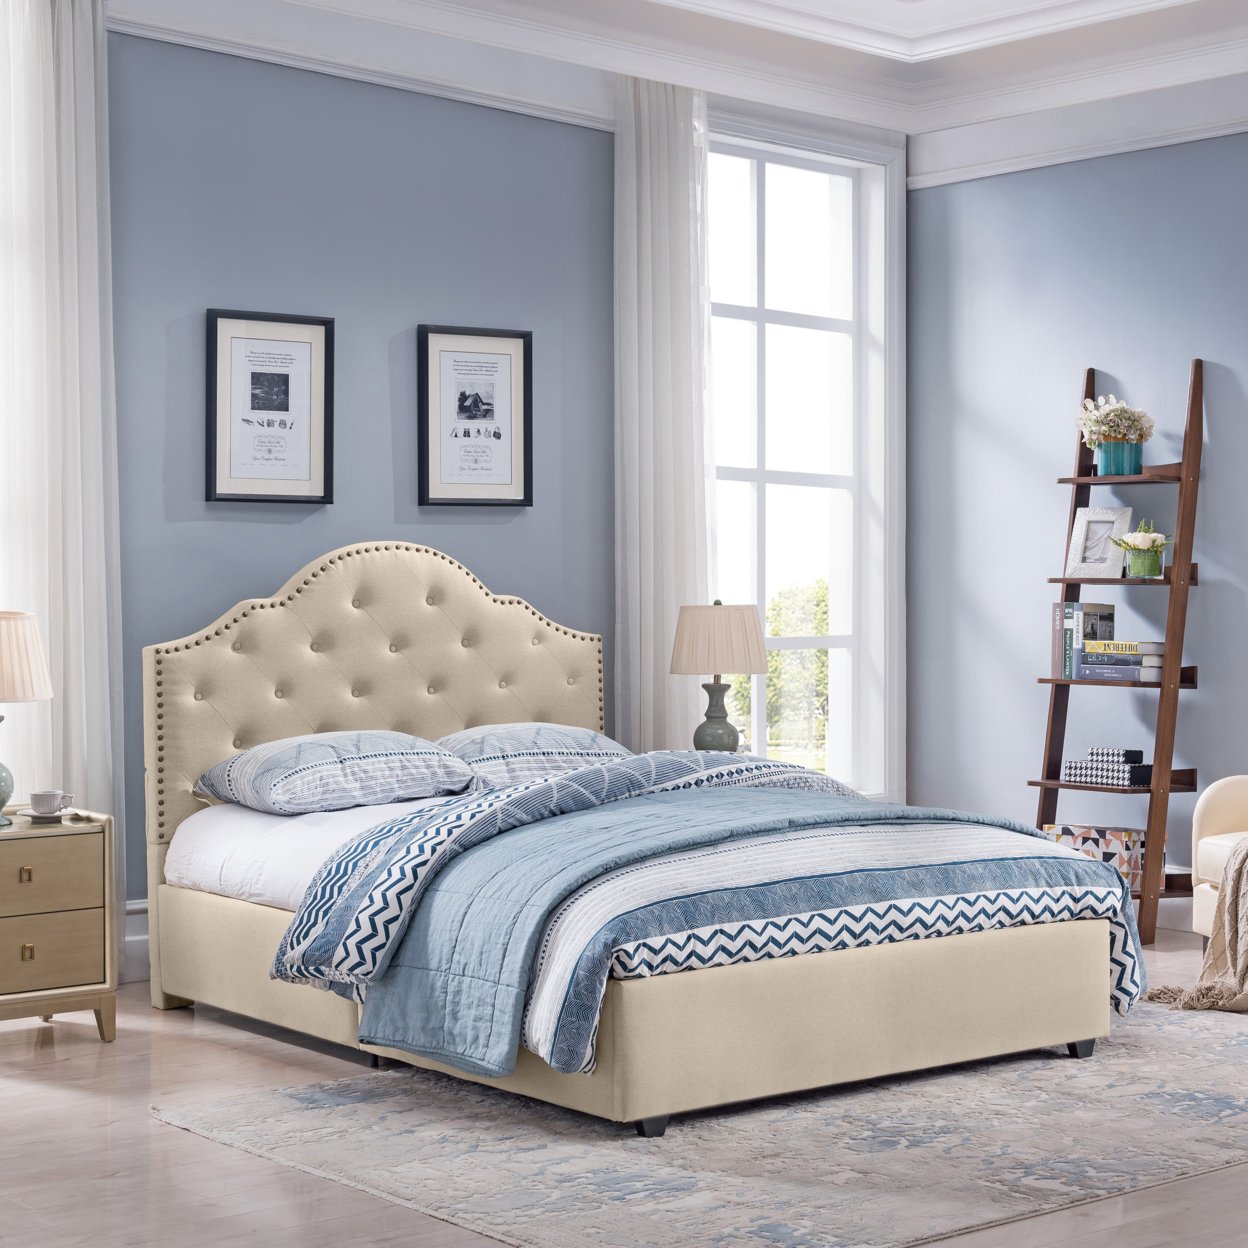 Gentry Contemporary Button-Tufted Upholstered Queen Bed Frame With Nailhead Accents - Beige